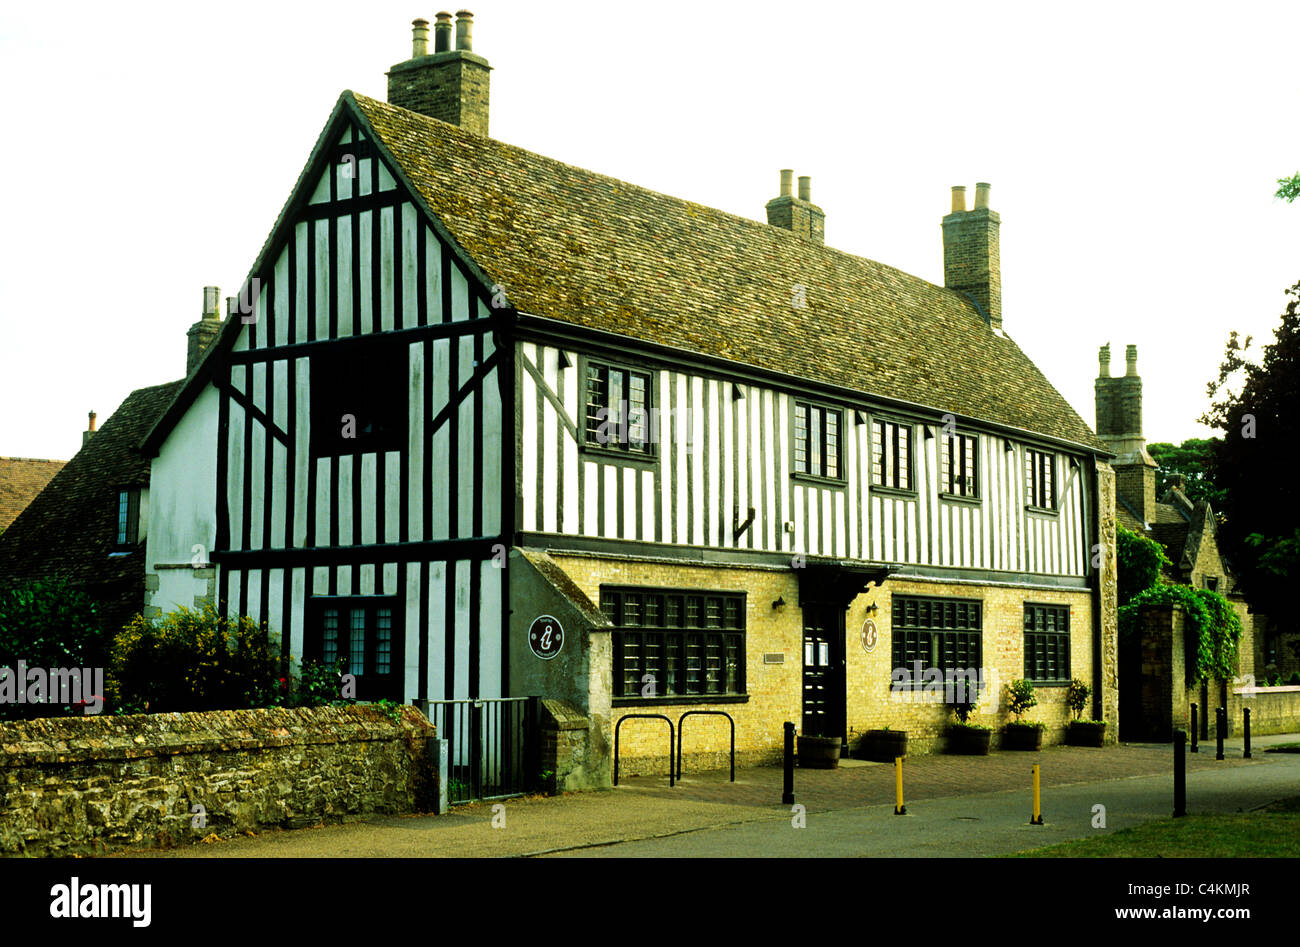 Ely, Cambridgeshire, Oliver Cromwell's House, Tourist Information Centre, TIC England UK Cromwell 17th century half timbered Stock Photo